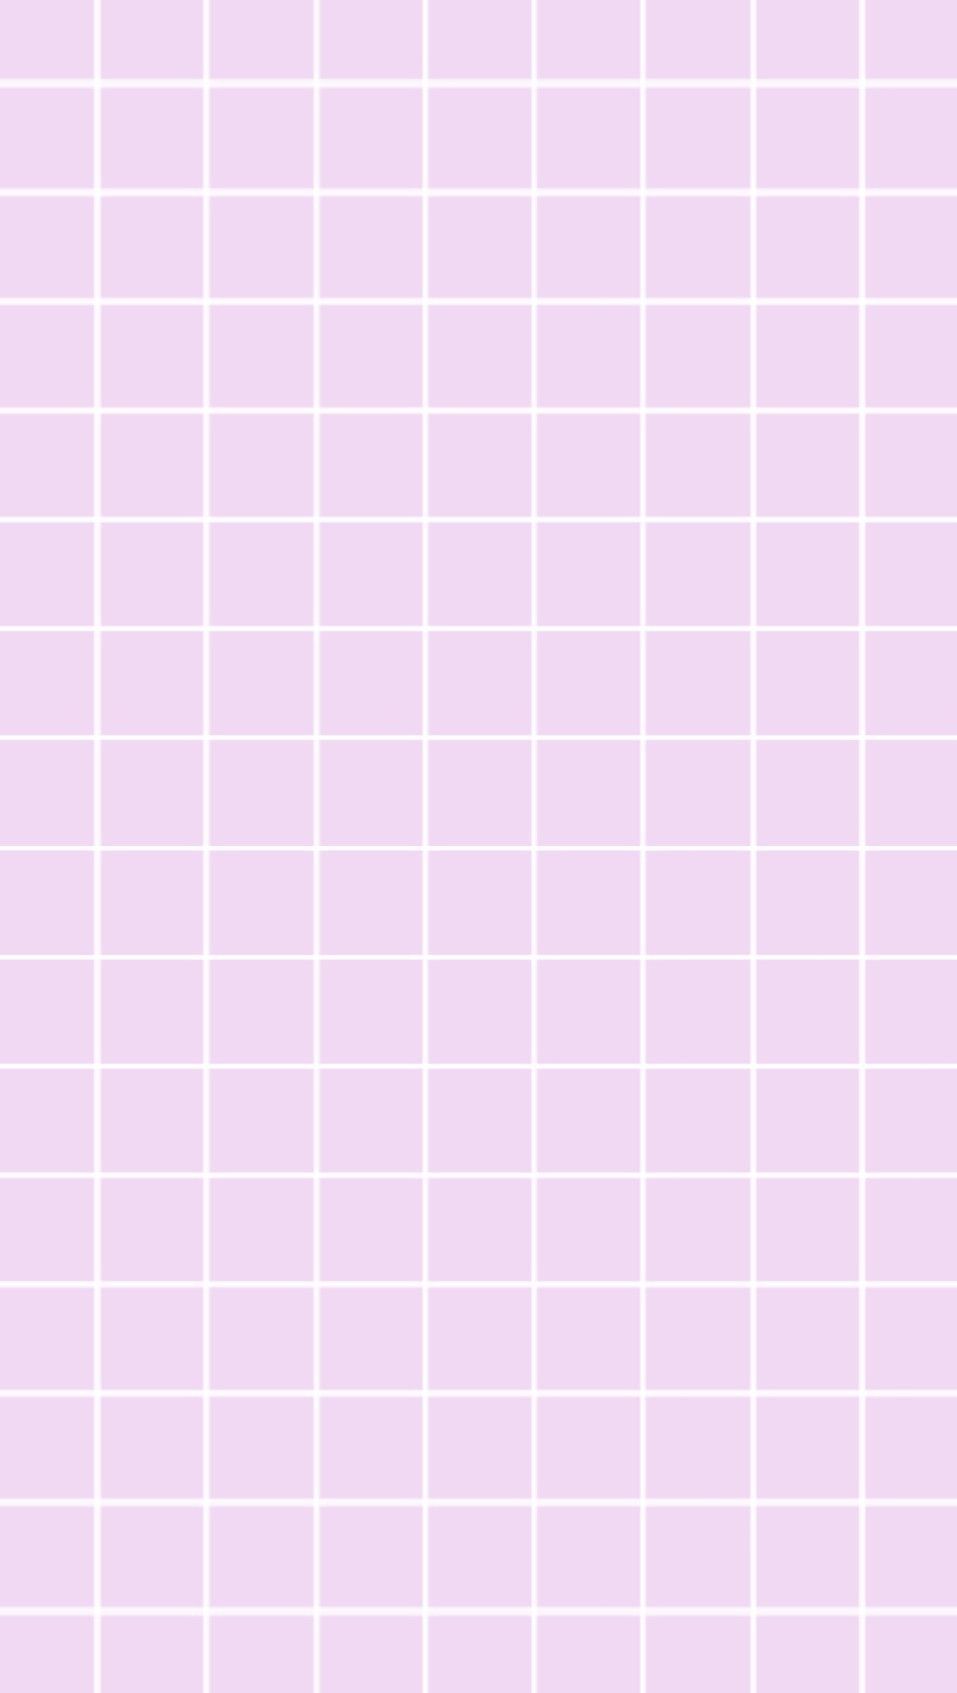 Aesthetic phone background with a grid pattern - Grid